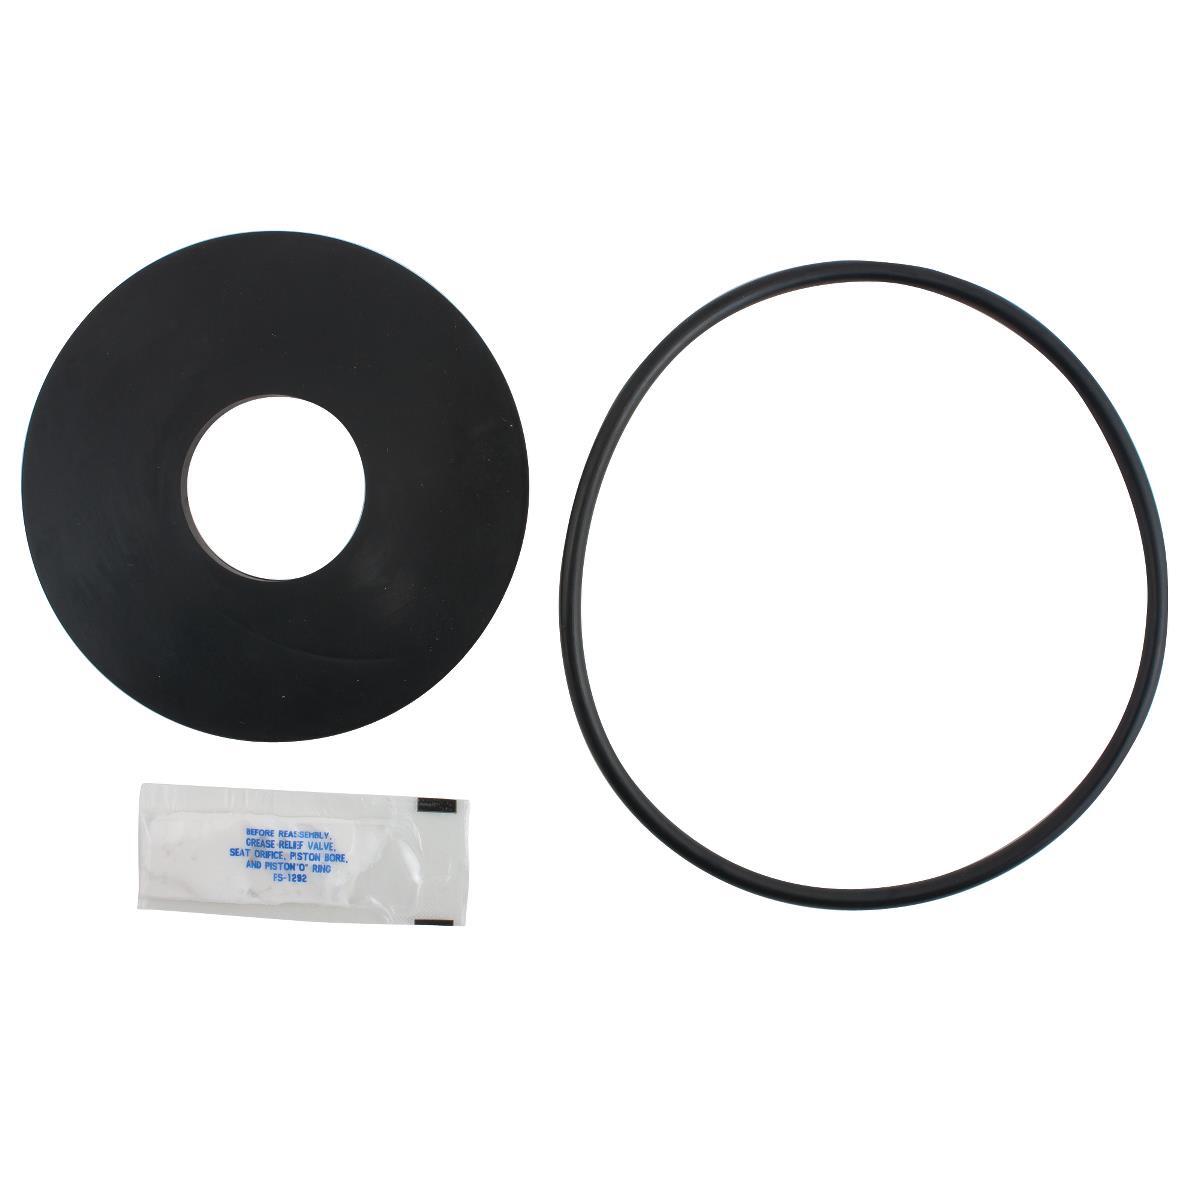 100mm 909 2nd Check Rubber 